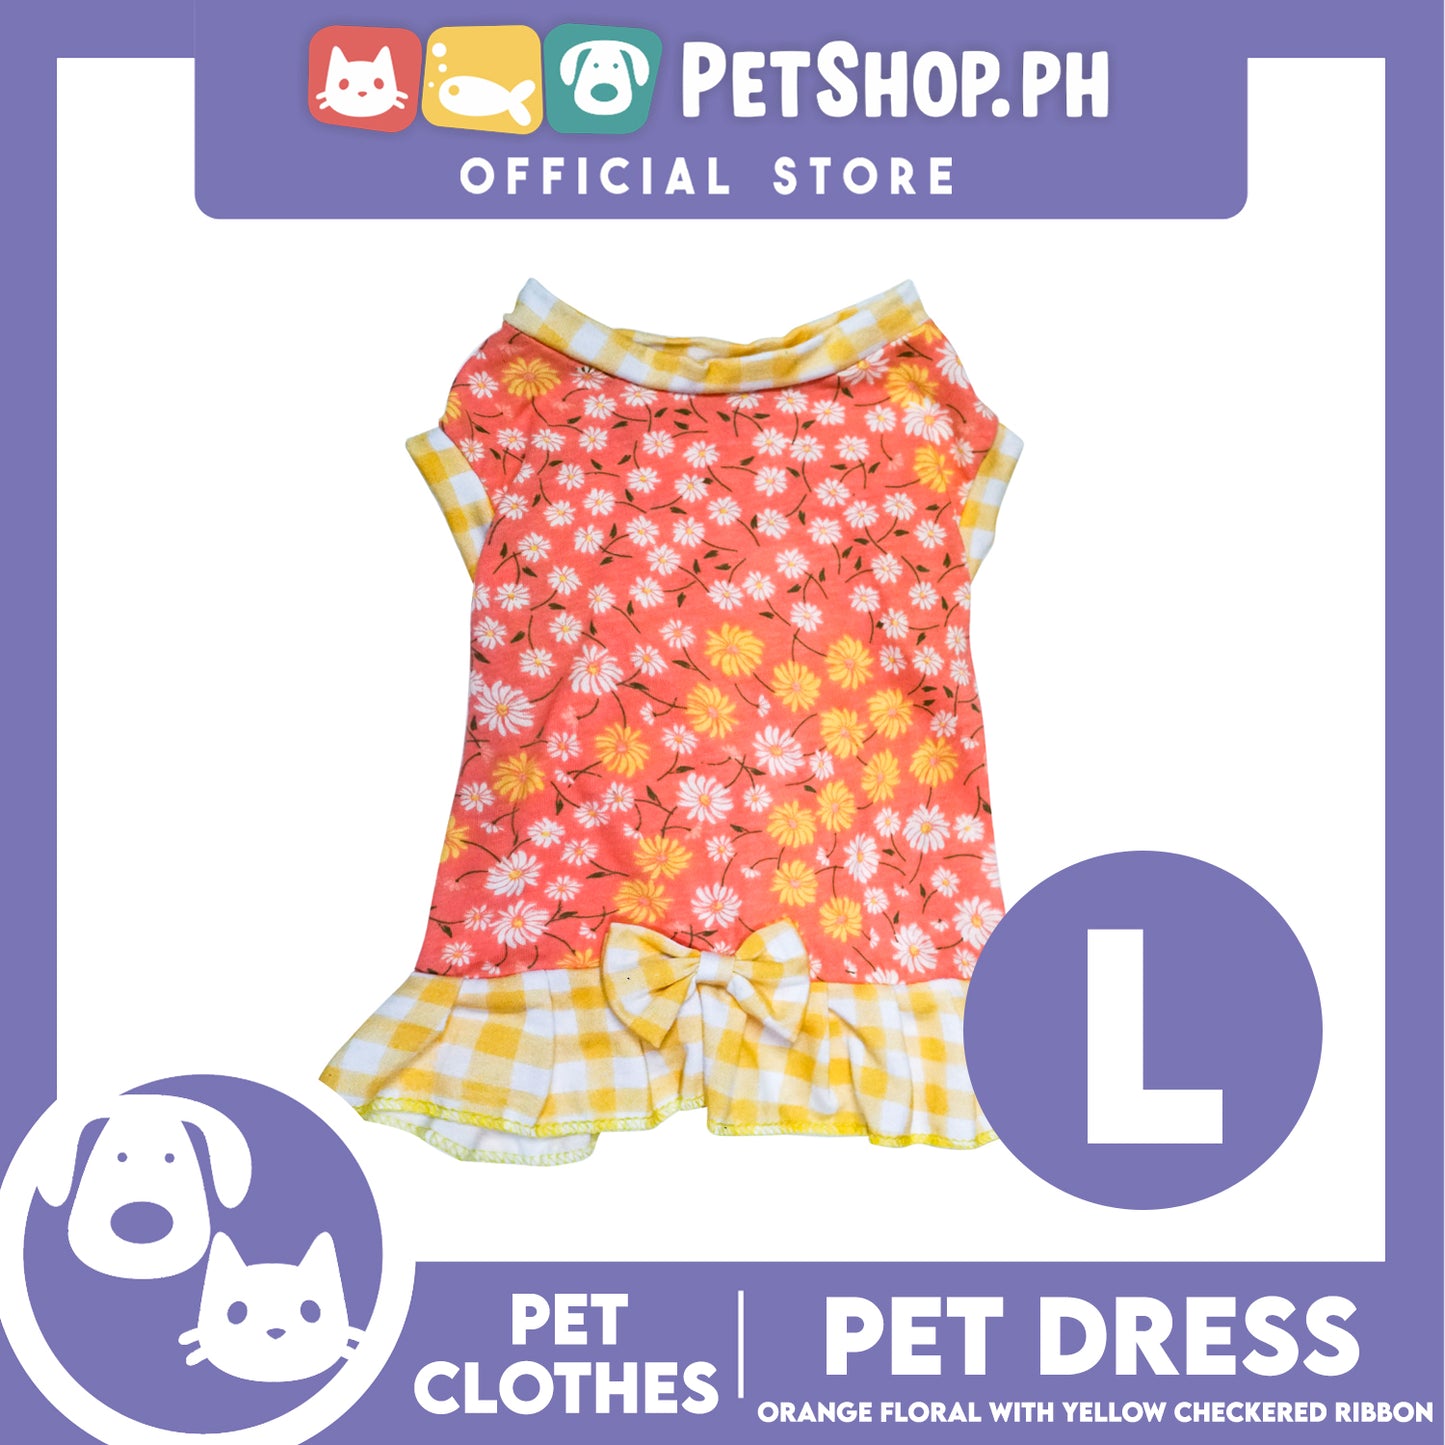 Pet Dress Orange Floral Yellow Checkered with Ribbon (Large) Pet Dress Clothes Perfect for Dogs